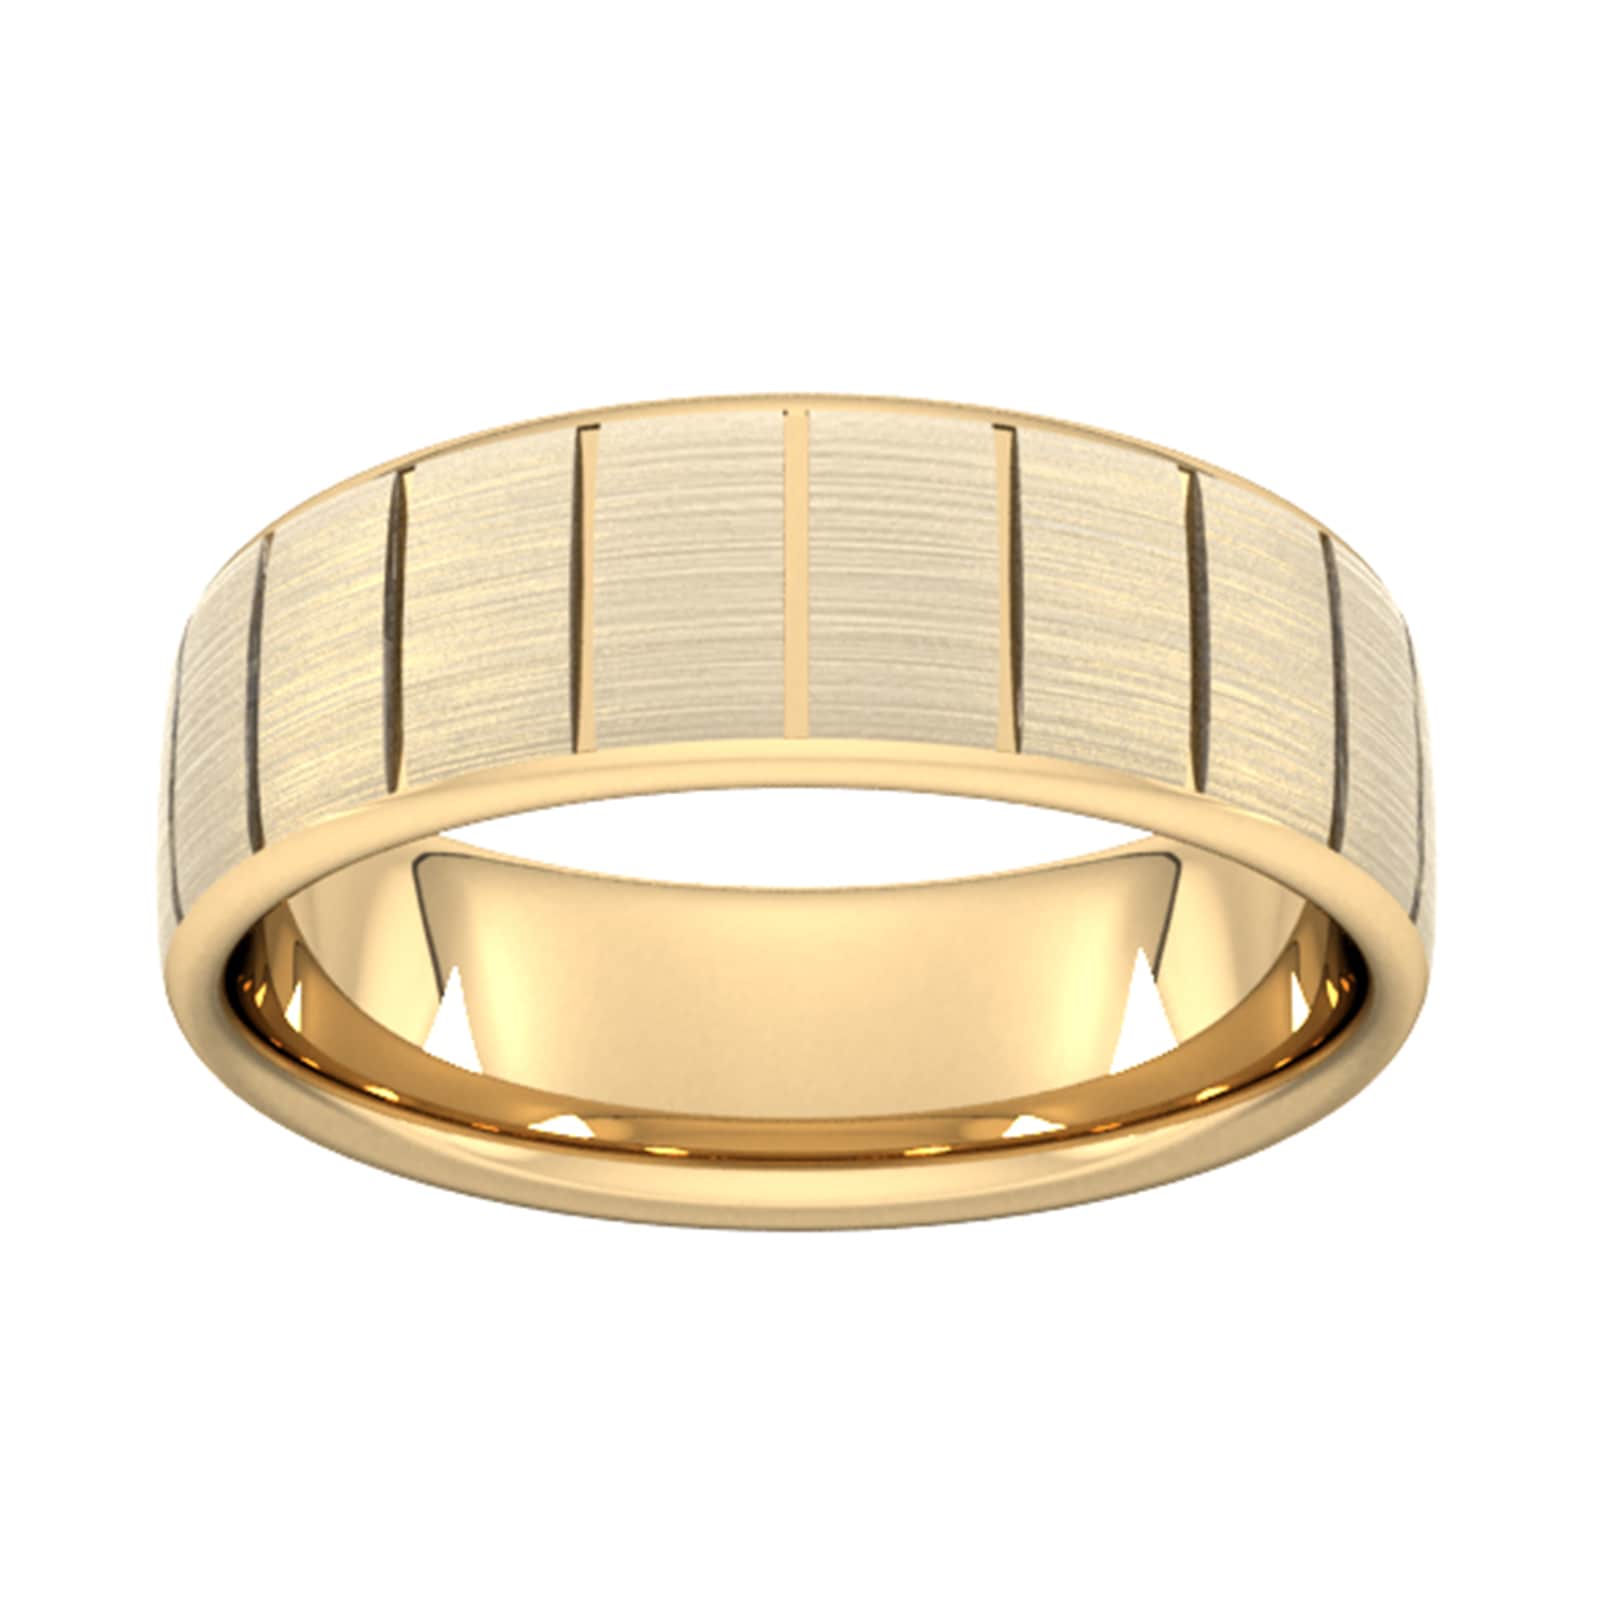 7mm D Shape Heavy Vertical Lines Wedding Ring In 9 Carat Yellow Gold - Ring Size U